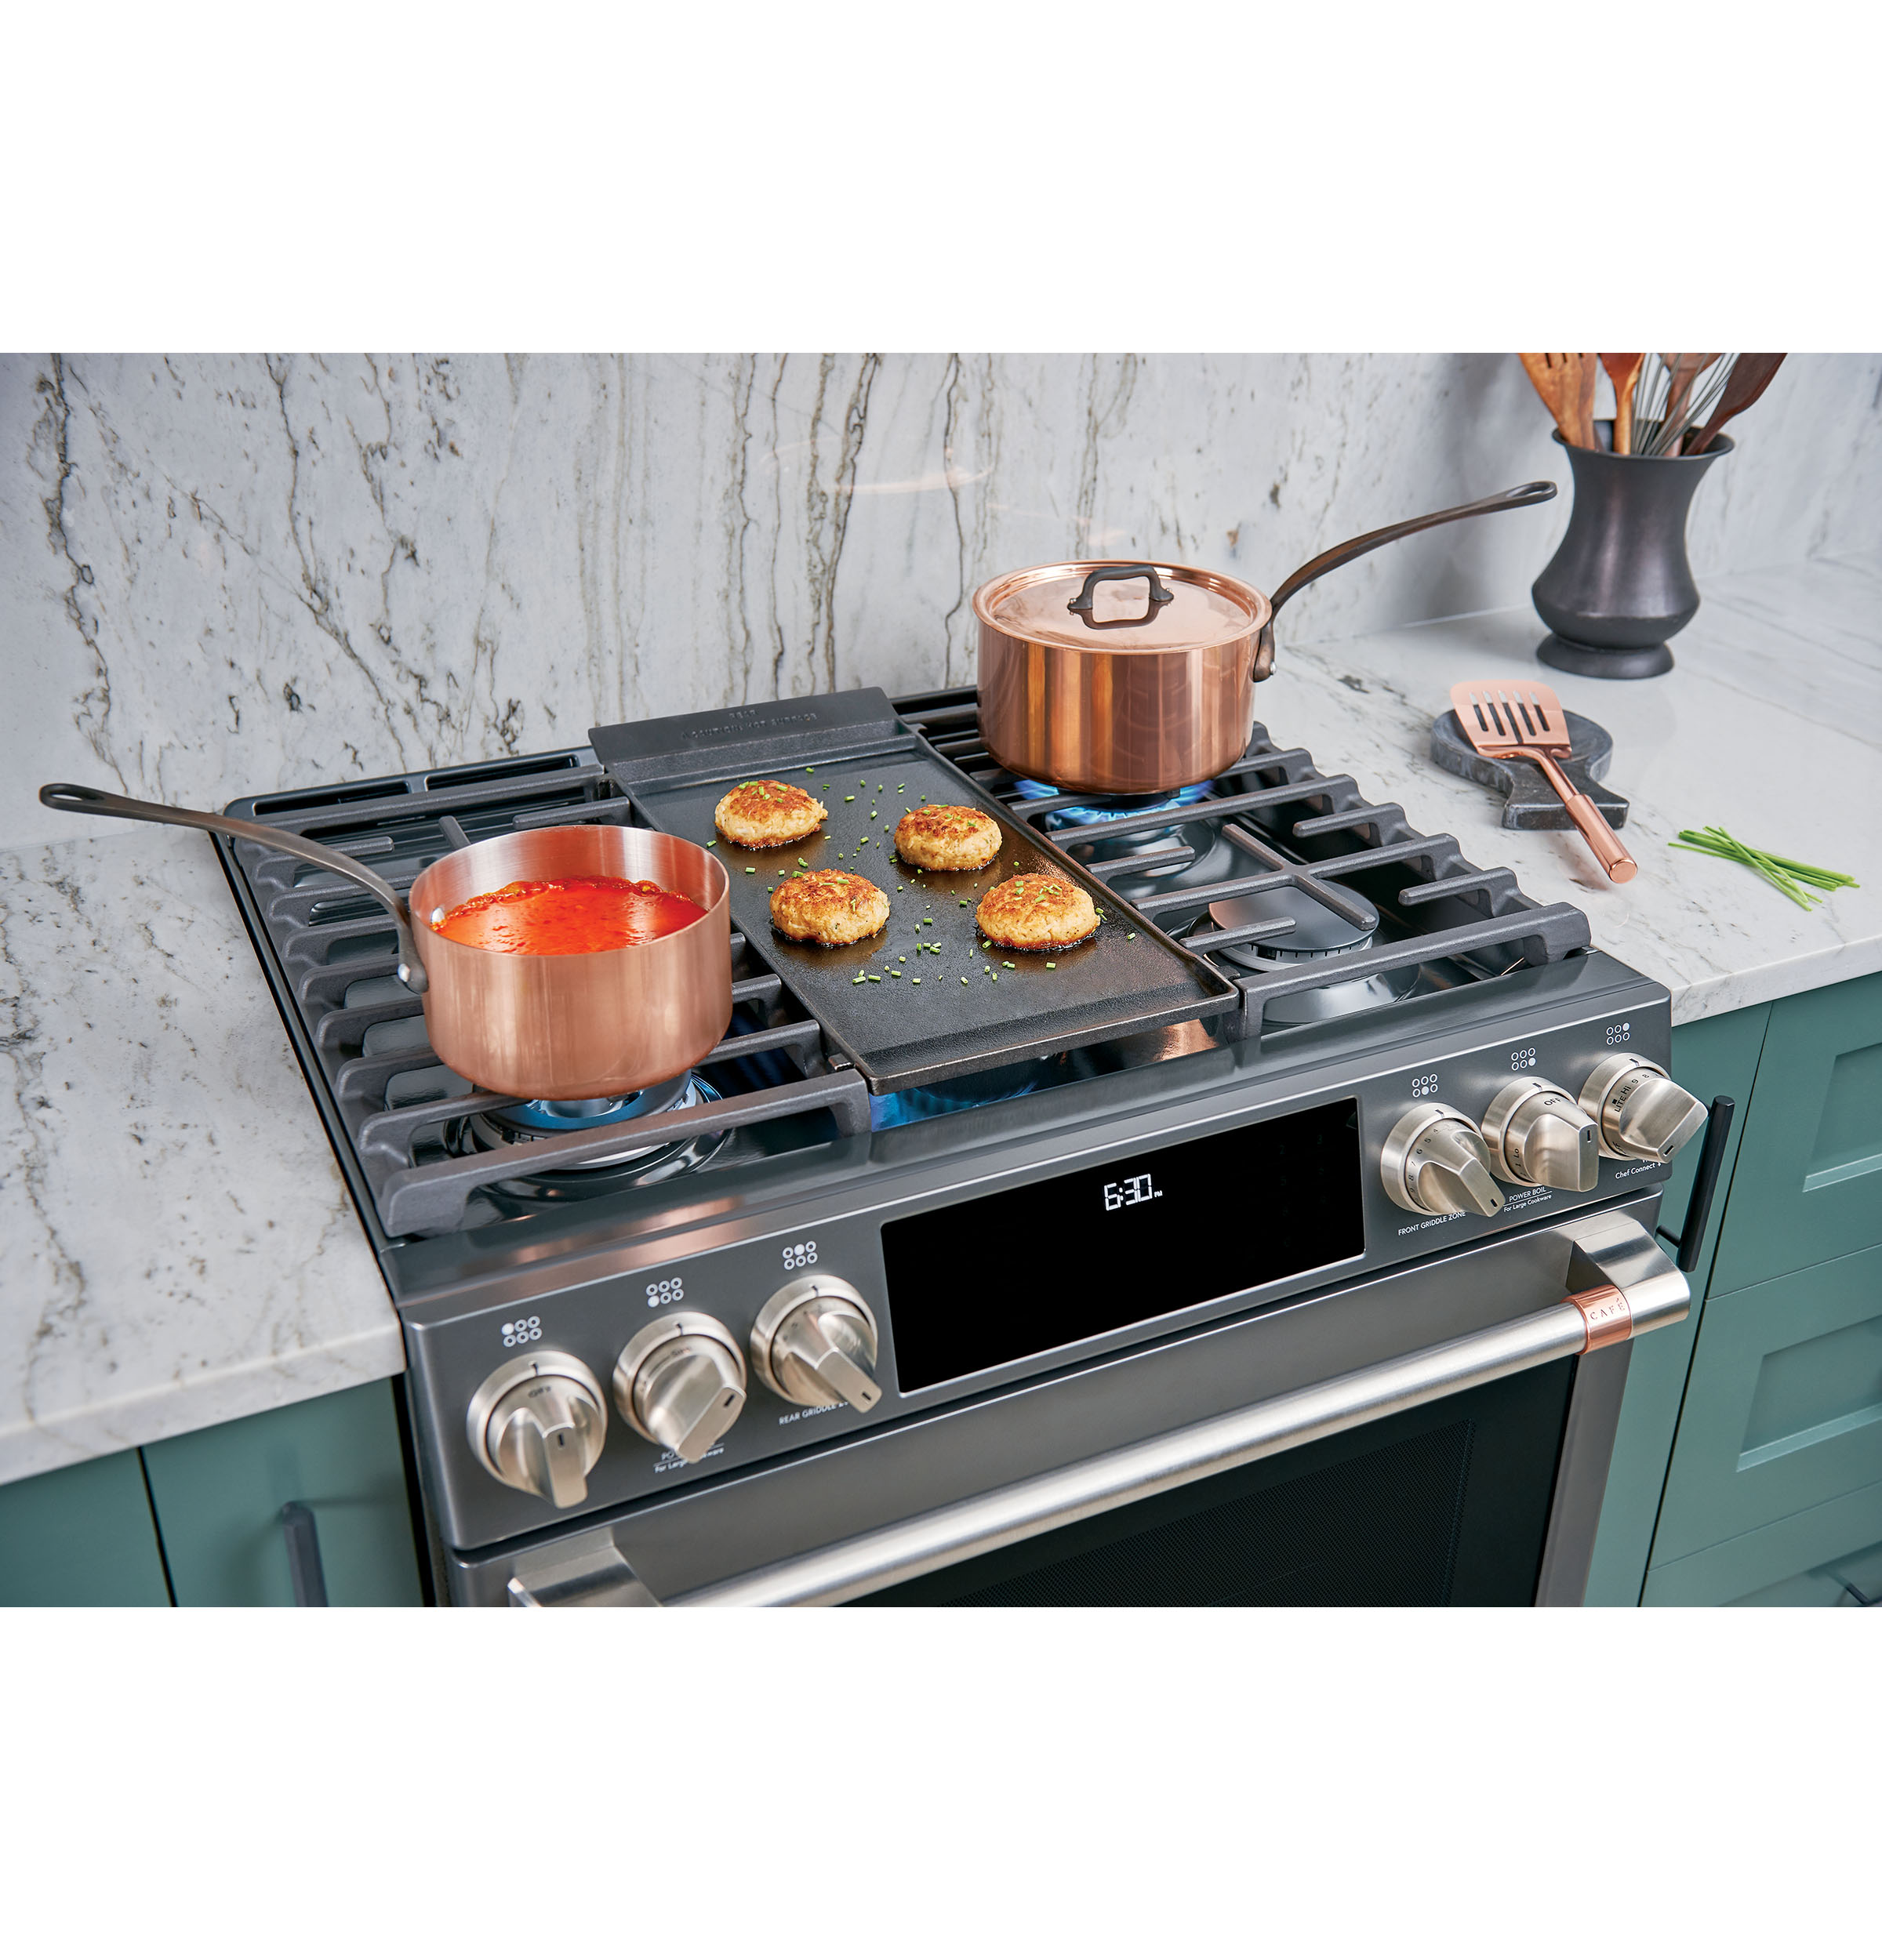 Expansive six-burner cooktop helps you entertain with ease